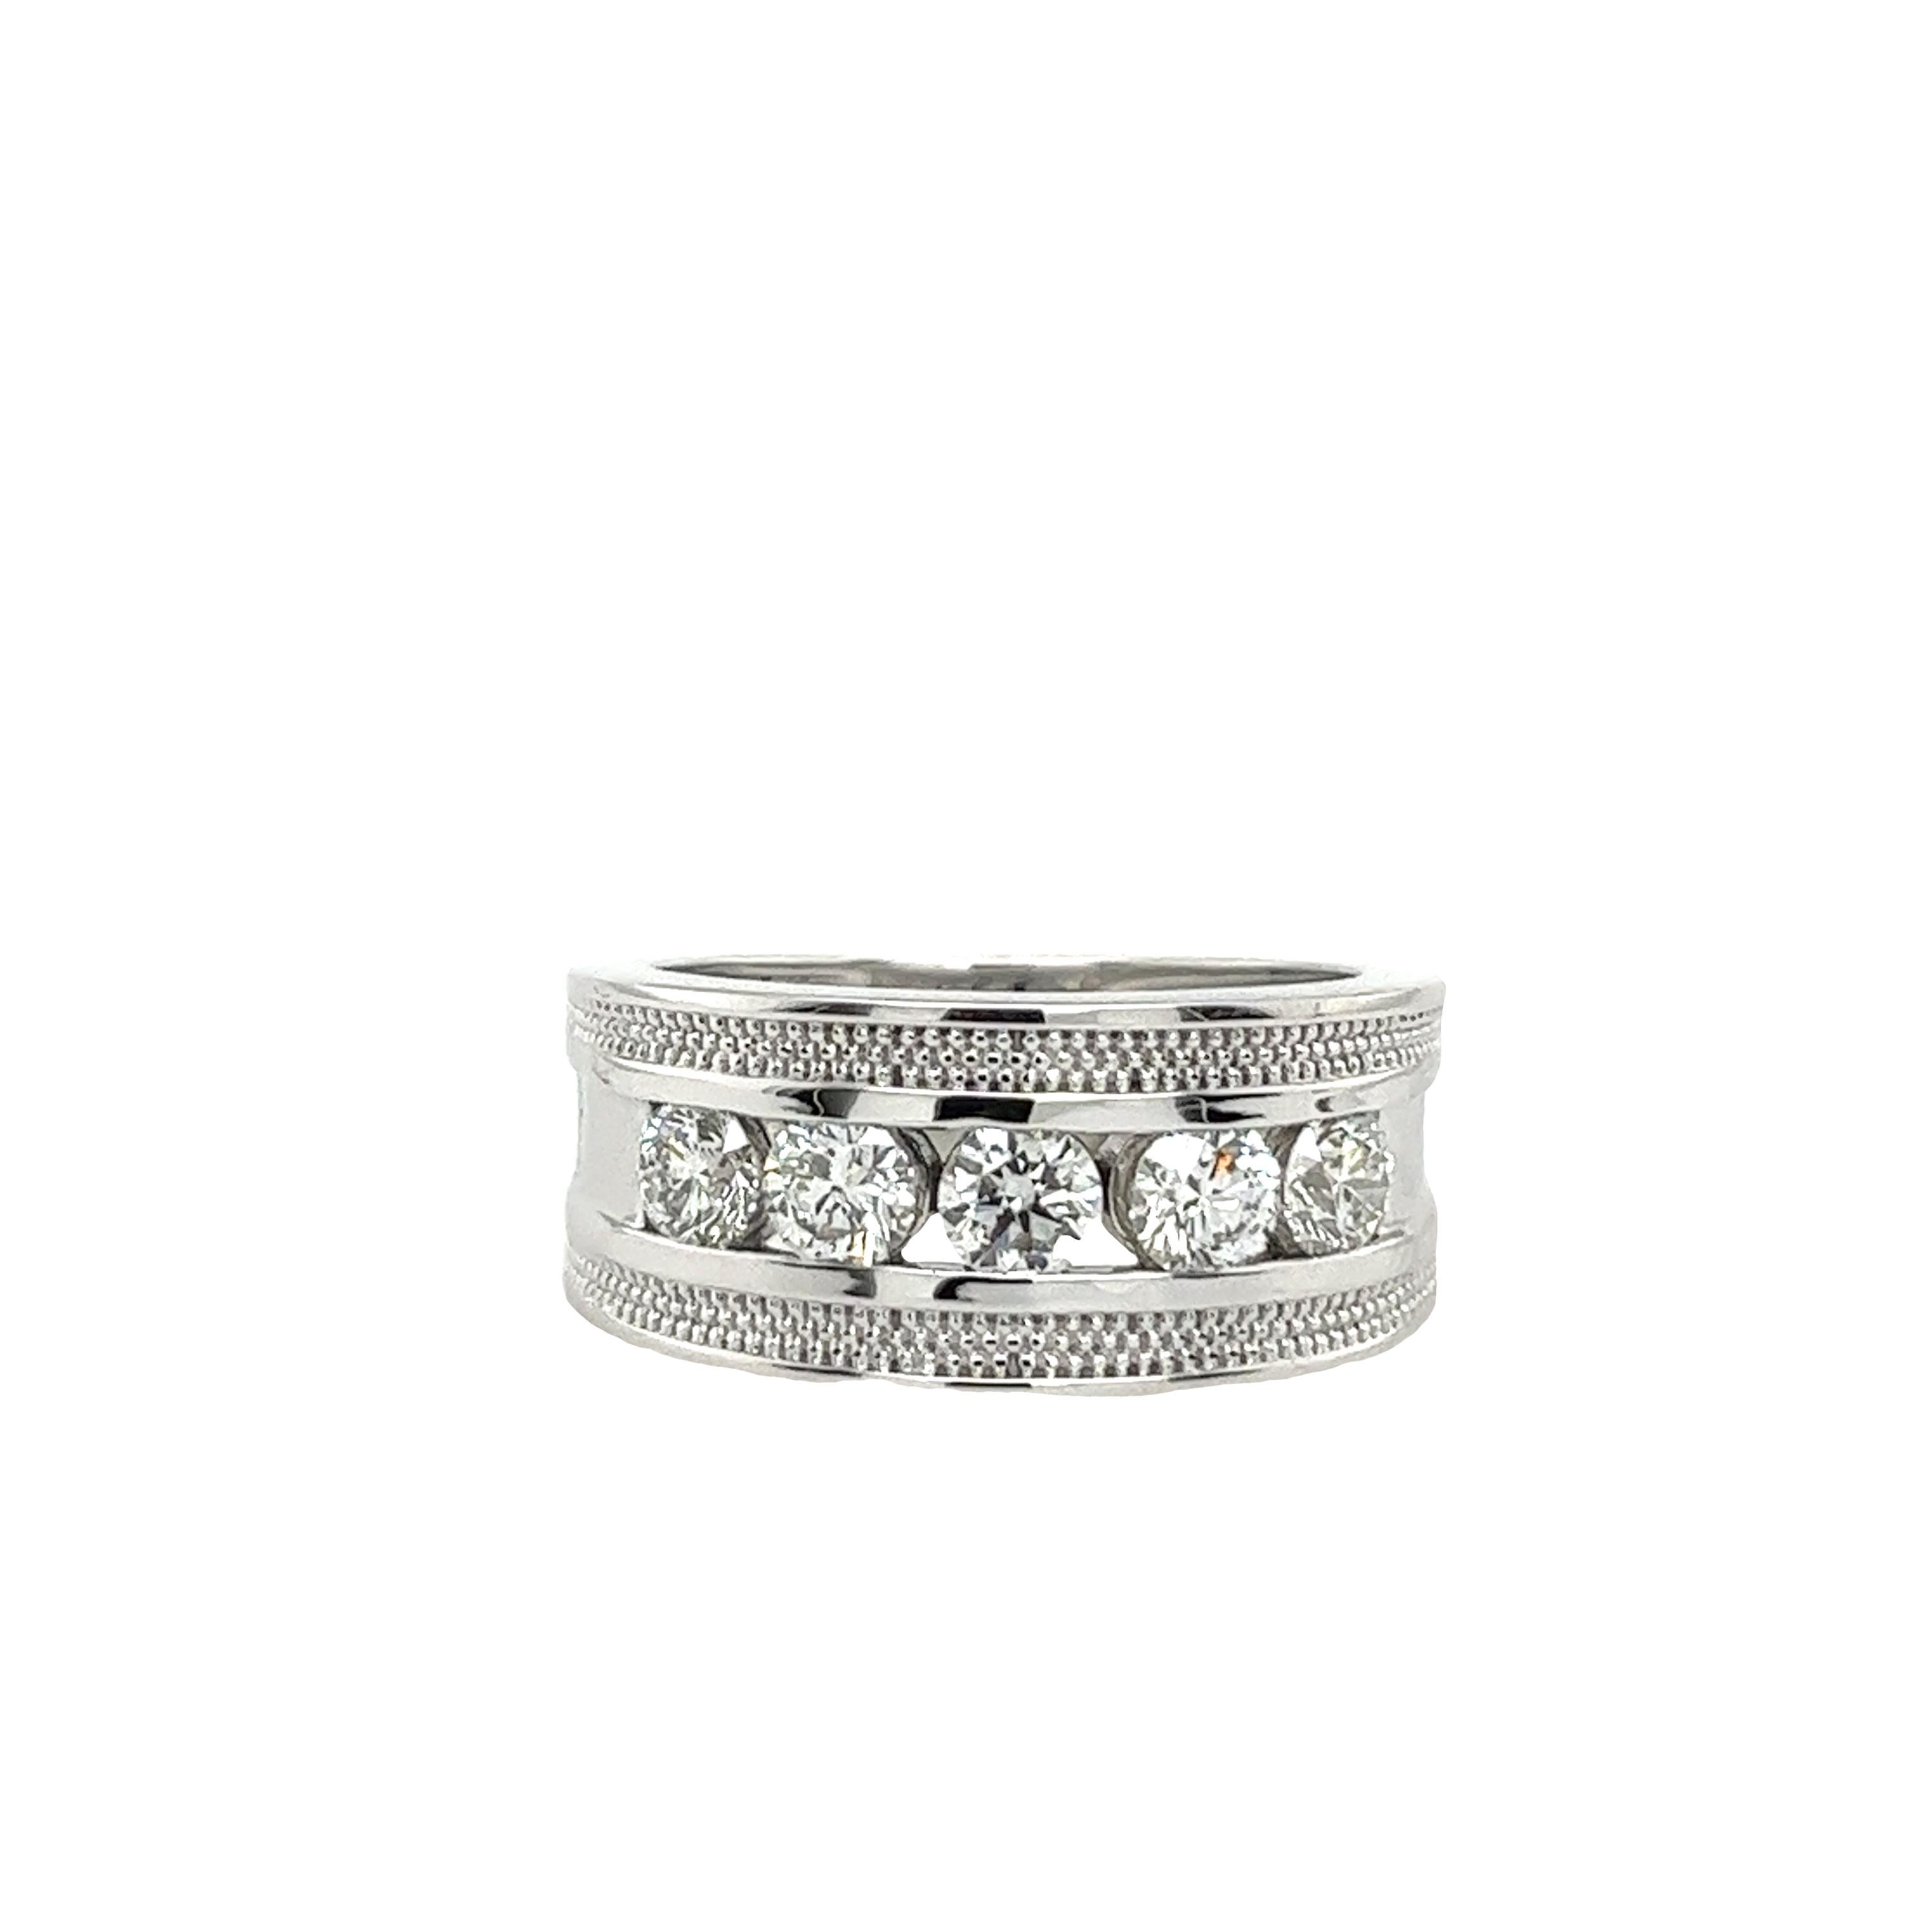 18ct White Gold 5 Stone Gia Diamond Ring, Set With 1.50ct G Colour IF clarity For Sale 3